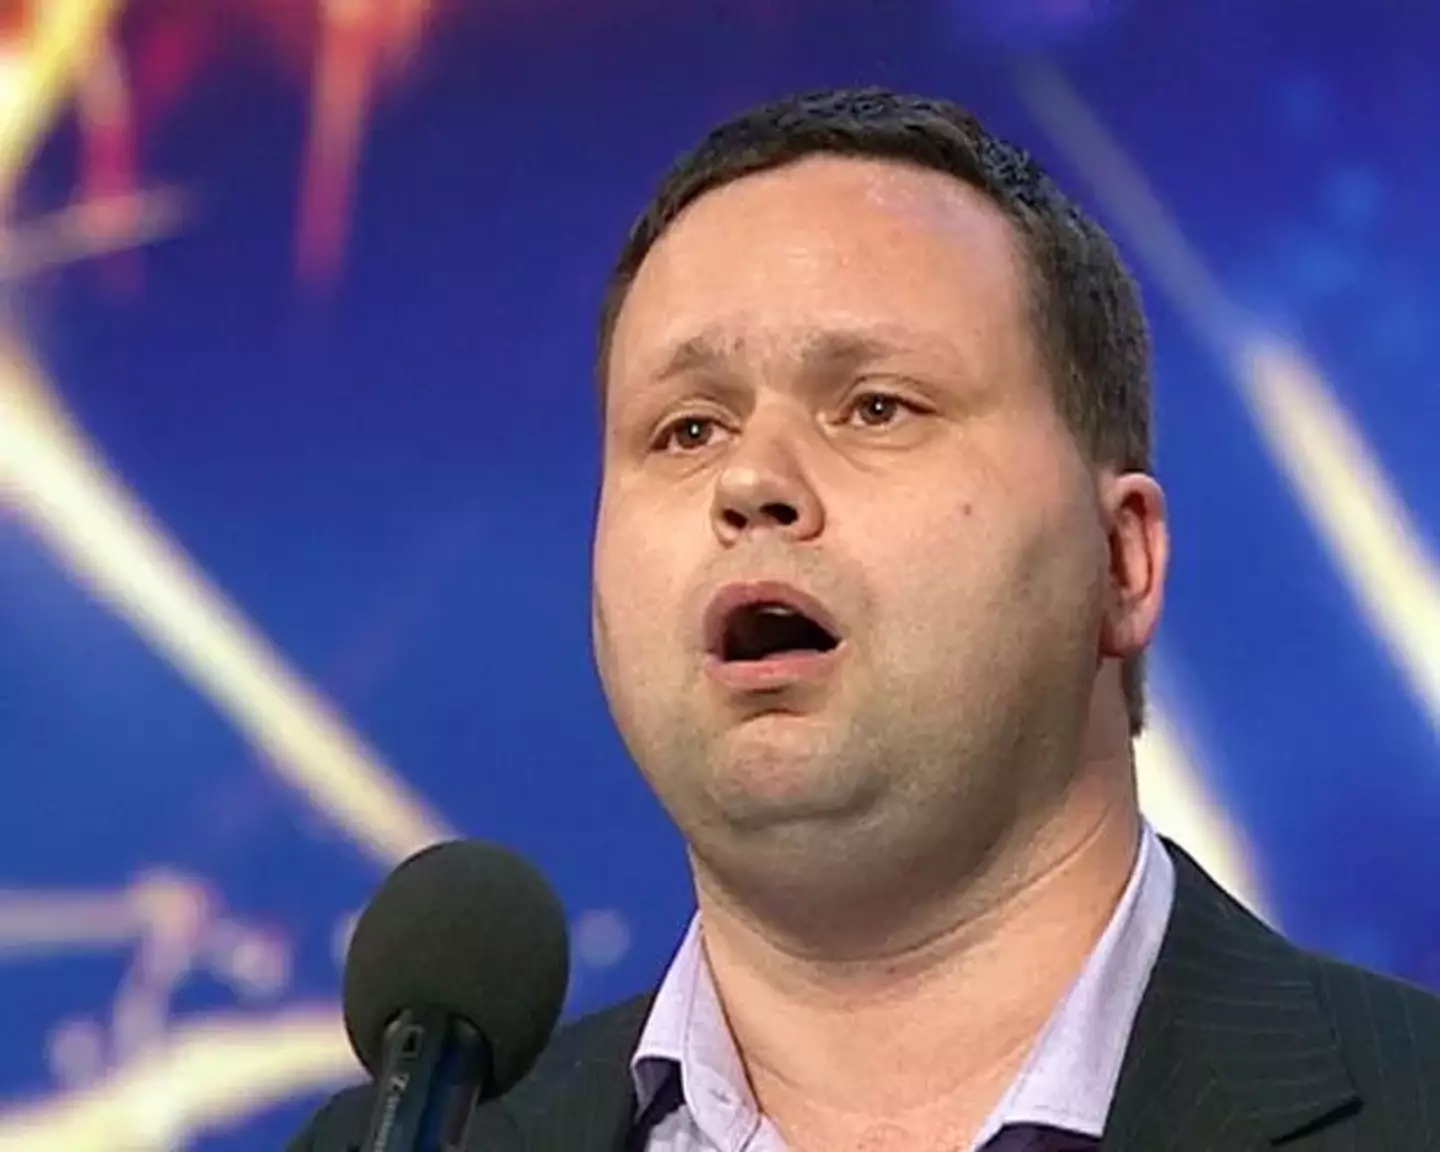 Paul Potts has opened up about his experiences on the show.